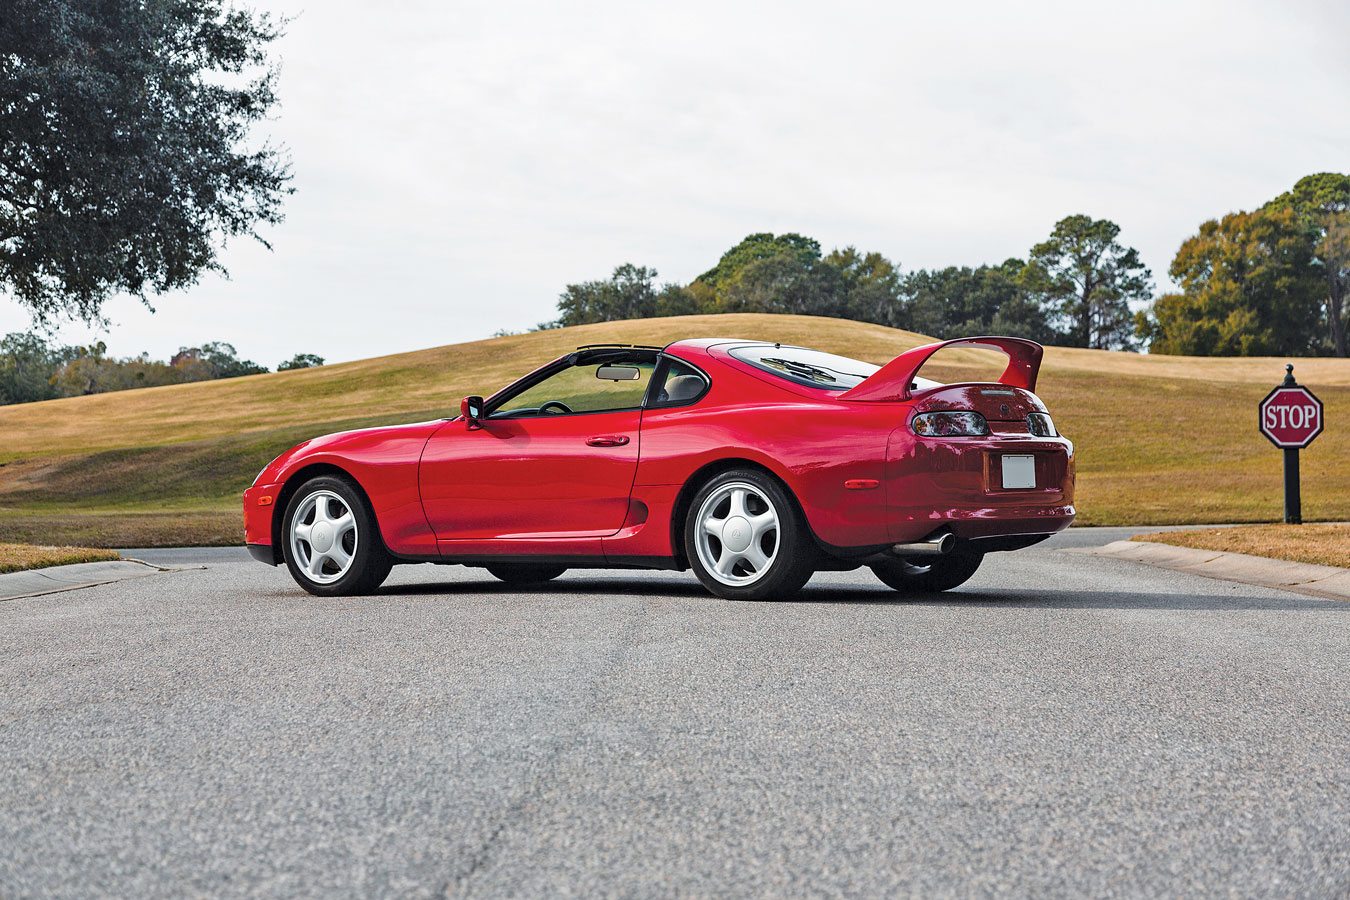 This Mk4 Toyota Supra Just Sold For $176,000 At Auction